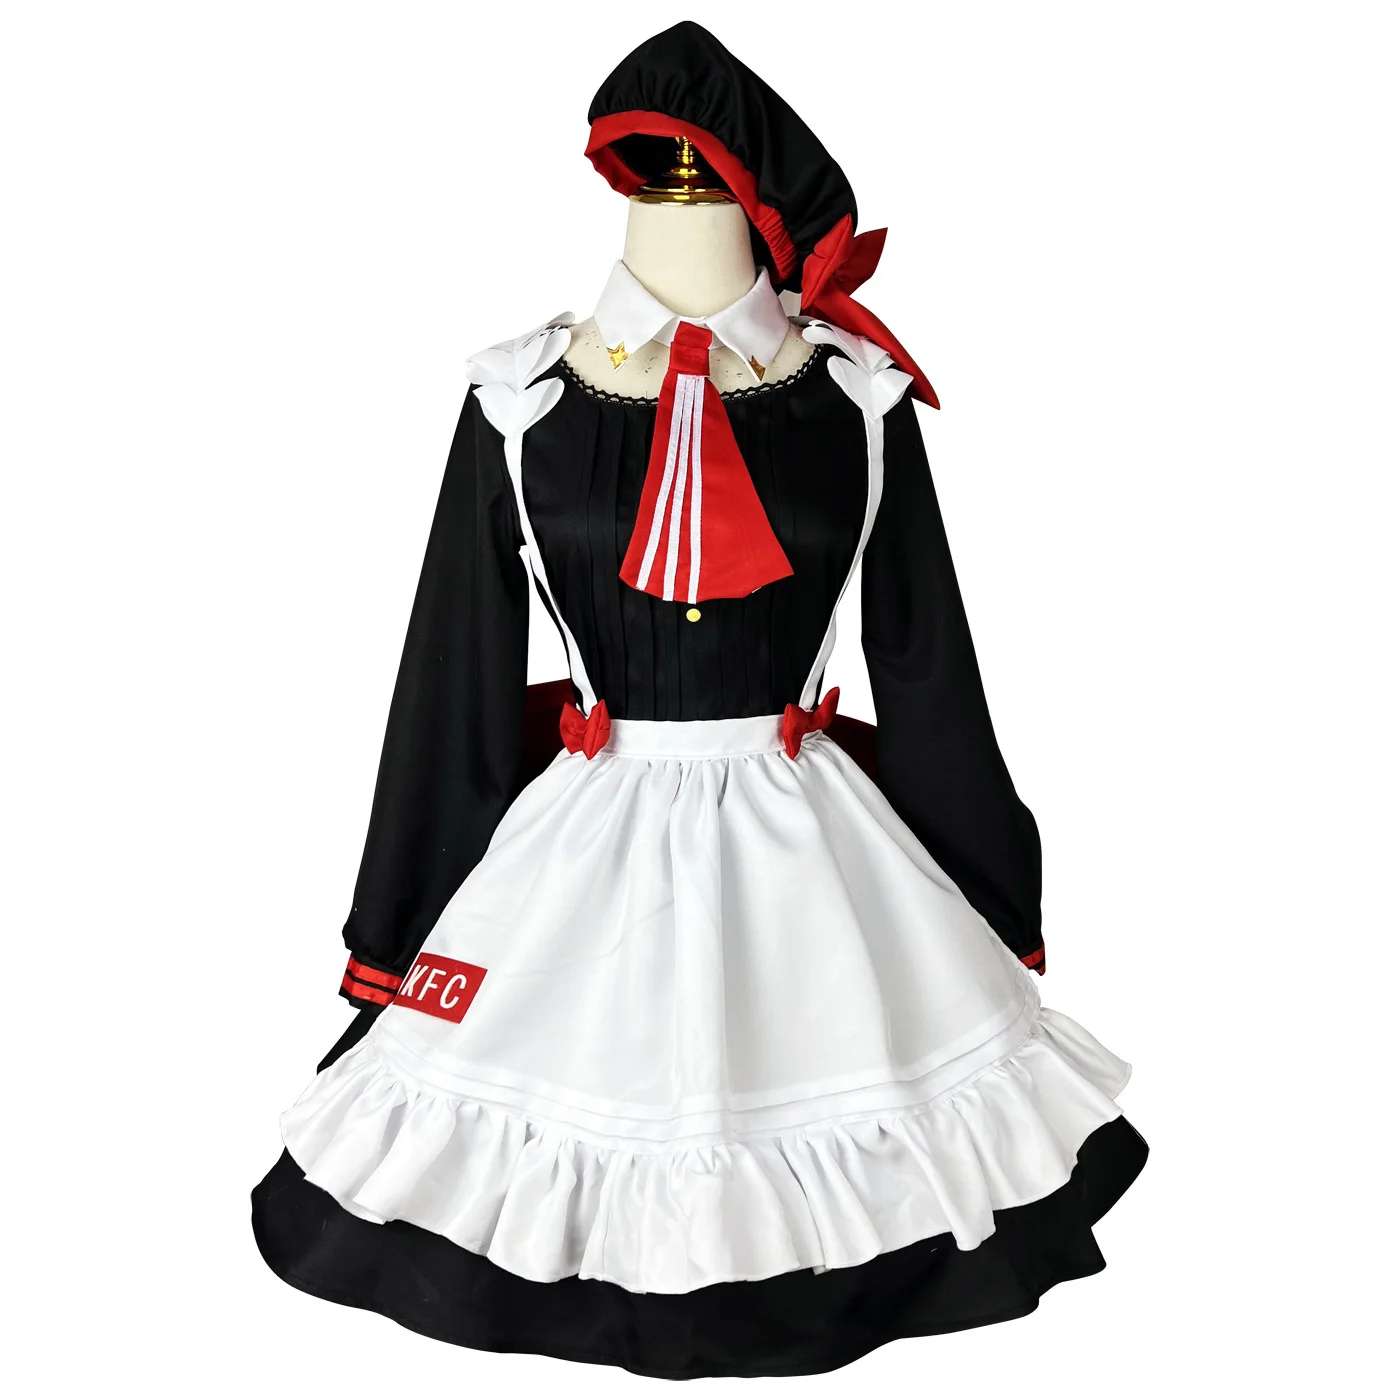 

Genshin Impact Noelle Cosplay Costume Game Cosplay Maid Costume for Women Lolita Dress Girl Jk Uniform With Hat Outfit